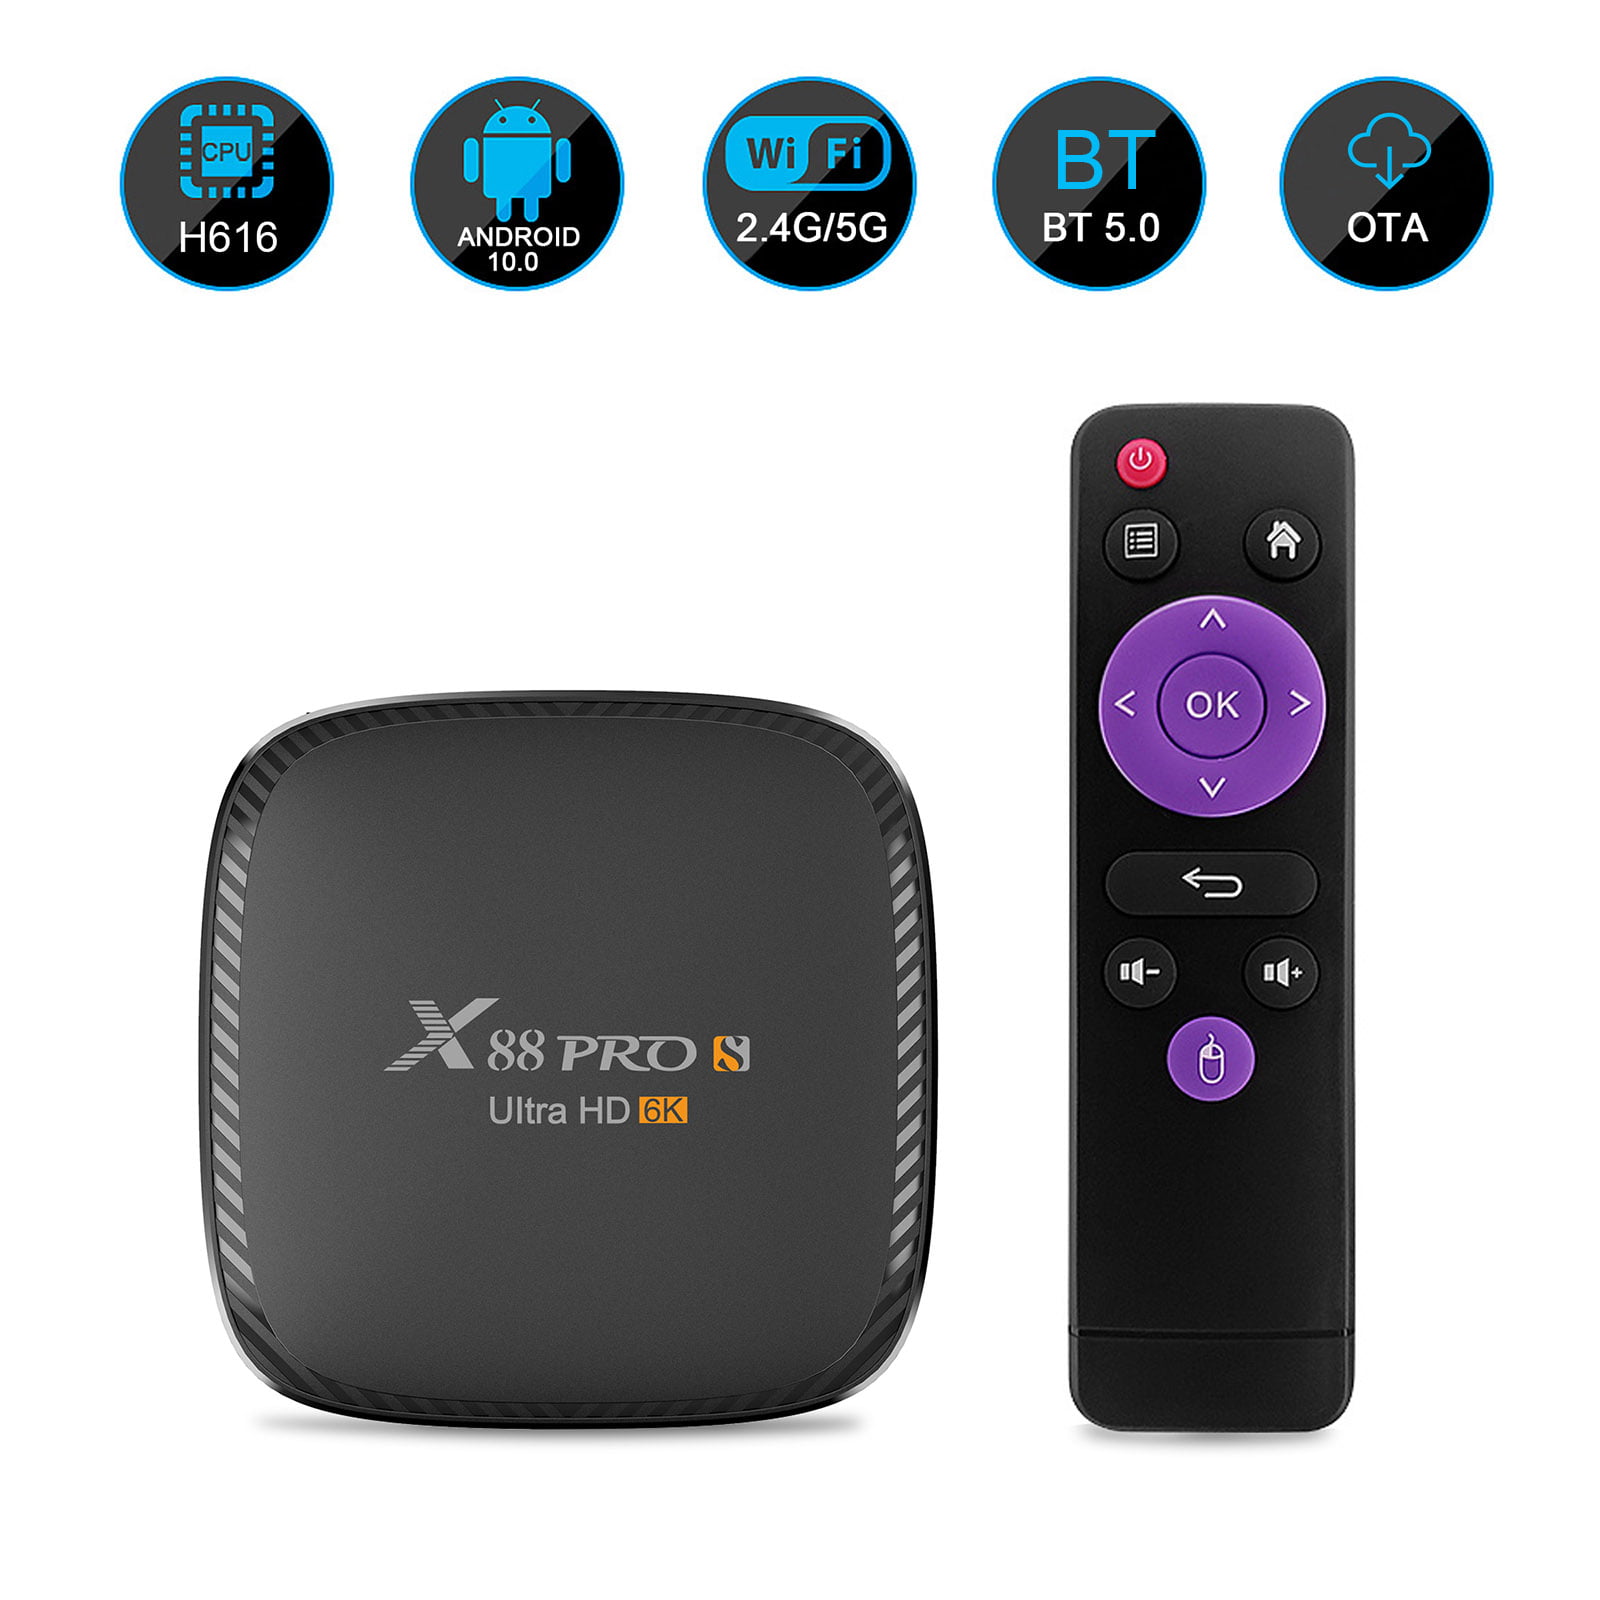 X88 PRO S 4GB RAM 64 ROM Android 10.0 TV Box,Allwinner H616 Quad-Core 64-bit Android Box with 2.4G/5G Dual WiFi 10/100M Ethernet Support H.265/3D/6K Ultra HD/BT 5.0/HDMI 2.0 Smart Box